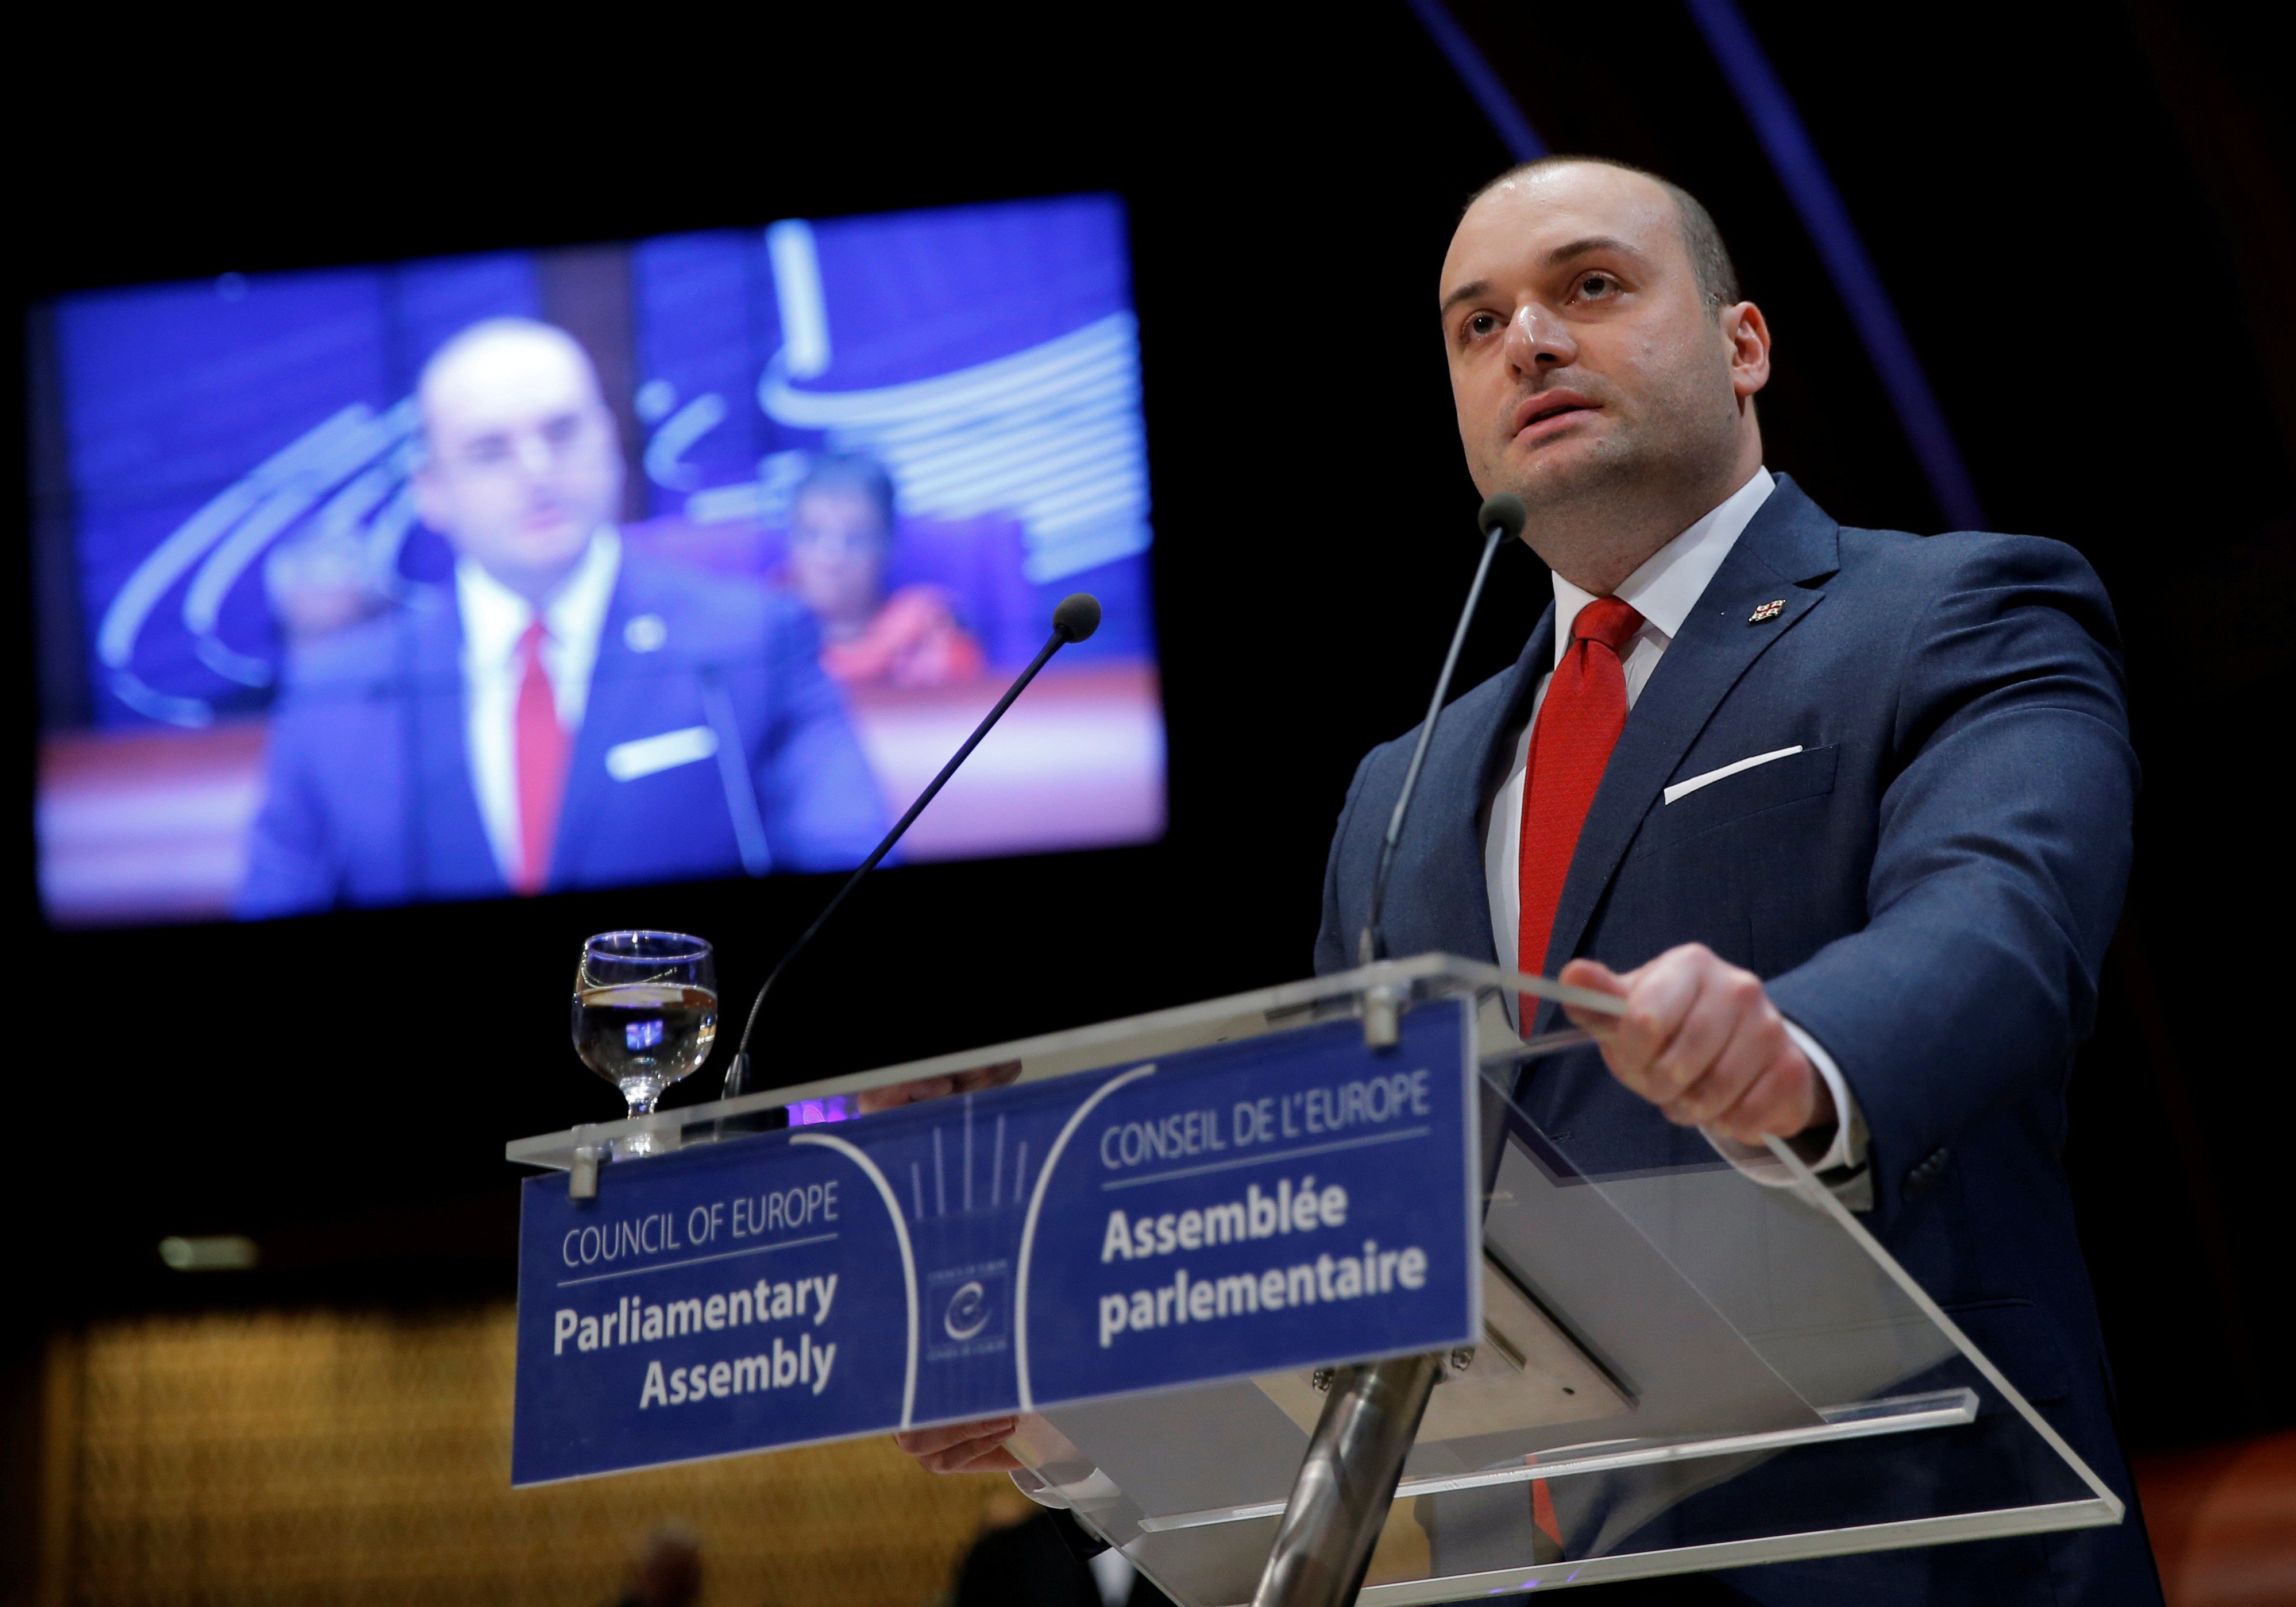 Georgian Prime Minister Mamuka Bakhtadze addresses the Parliamentary Assembly of the Council of Europe in Strasbourg. Photo: Reuters